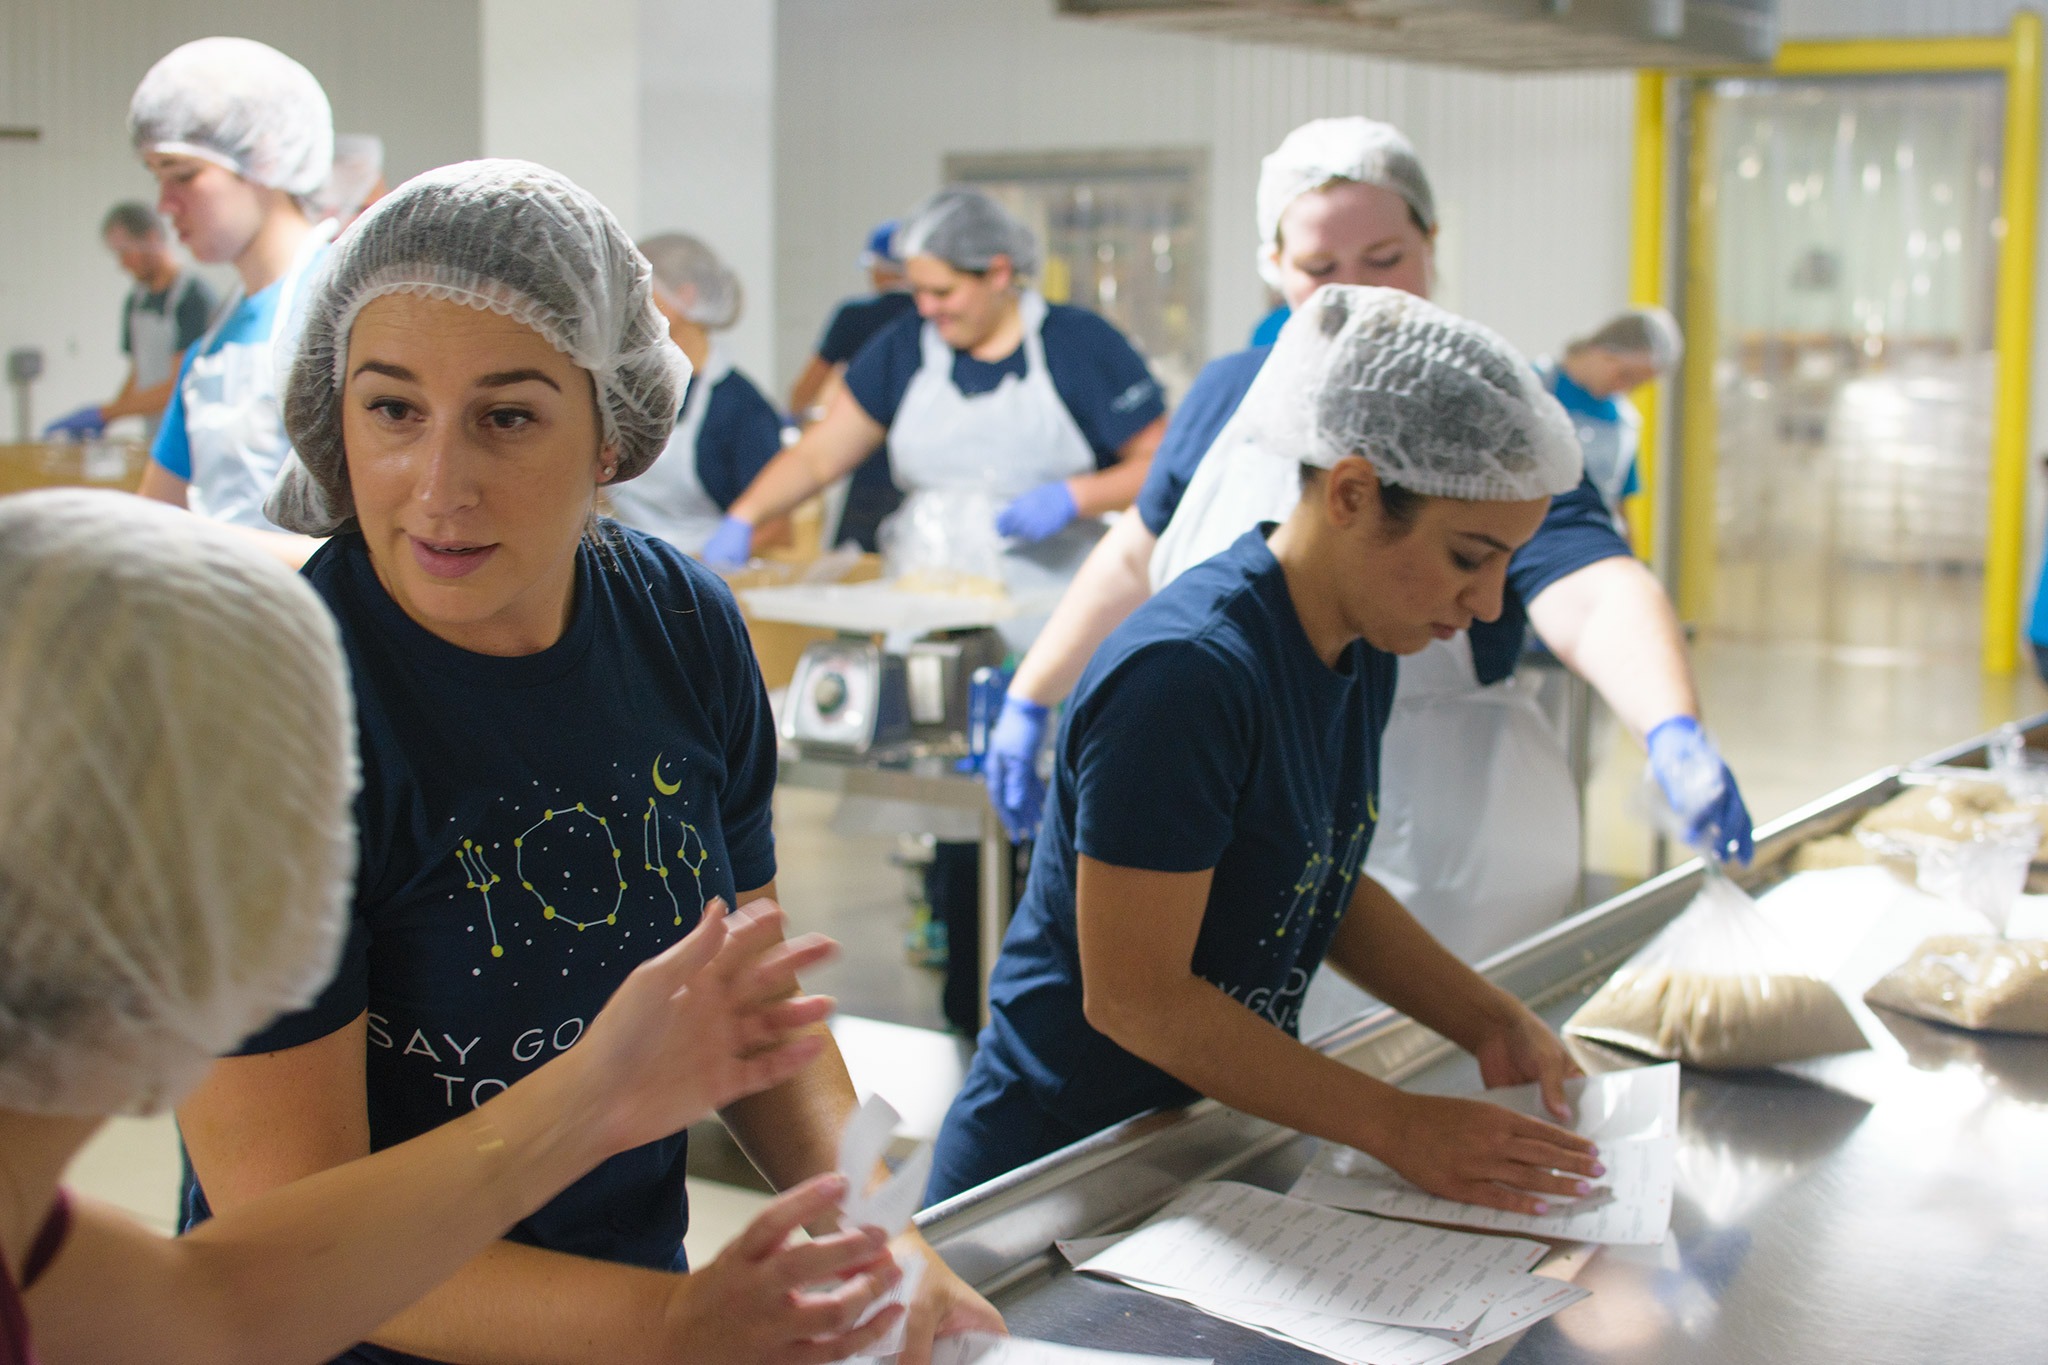 Volunteers for Omni Hotels & Resorts' "Say Goodnight to Hunger" program preparing meals.